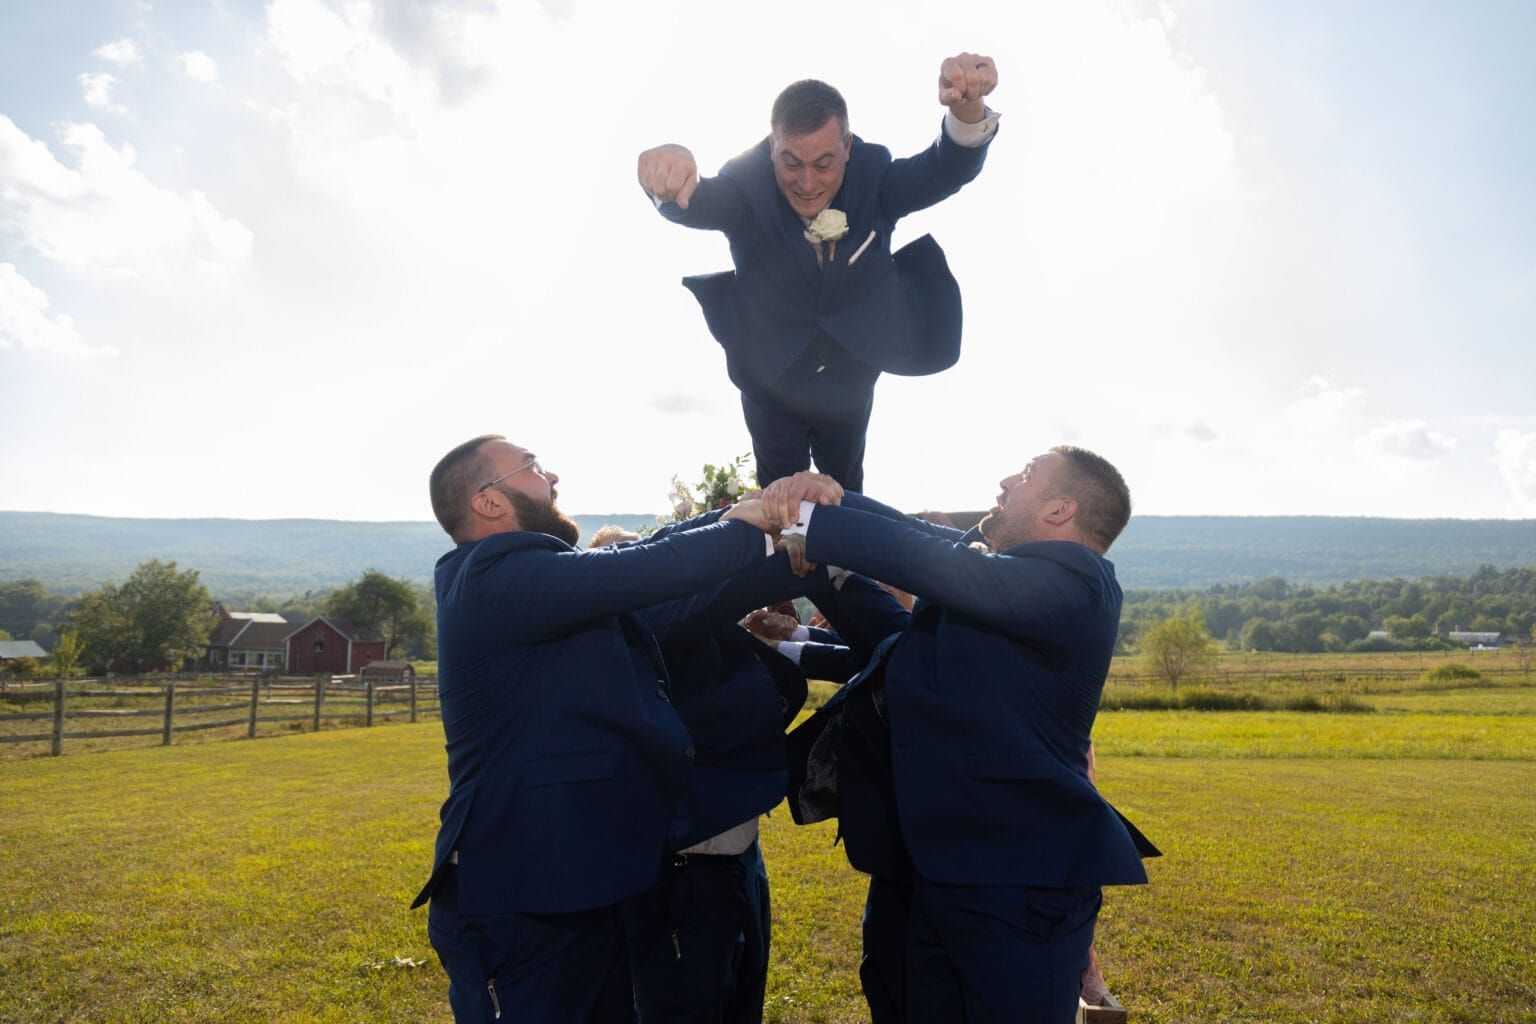 The groom is being lifted in the air by his groomsmen.